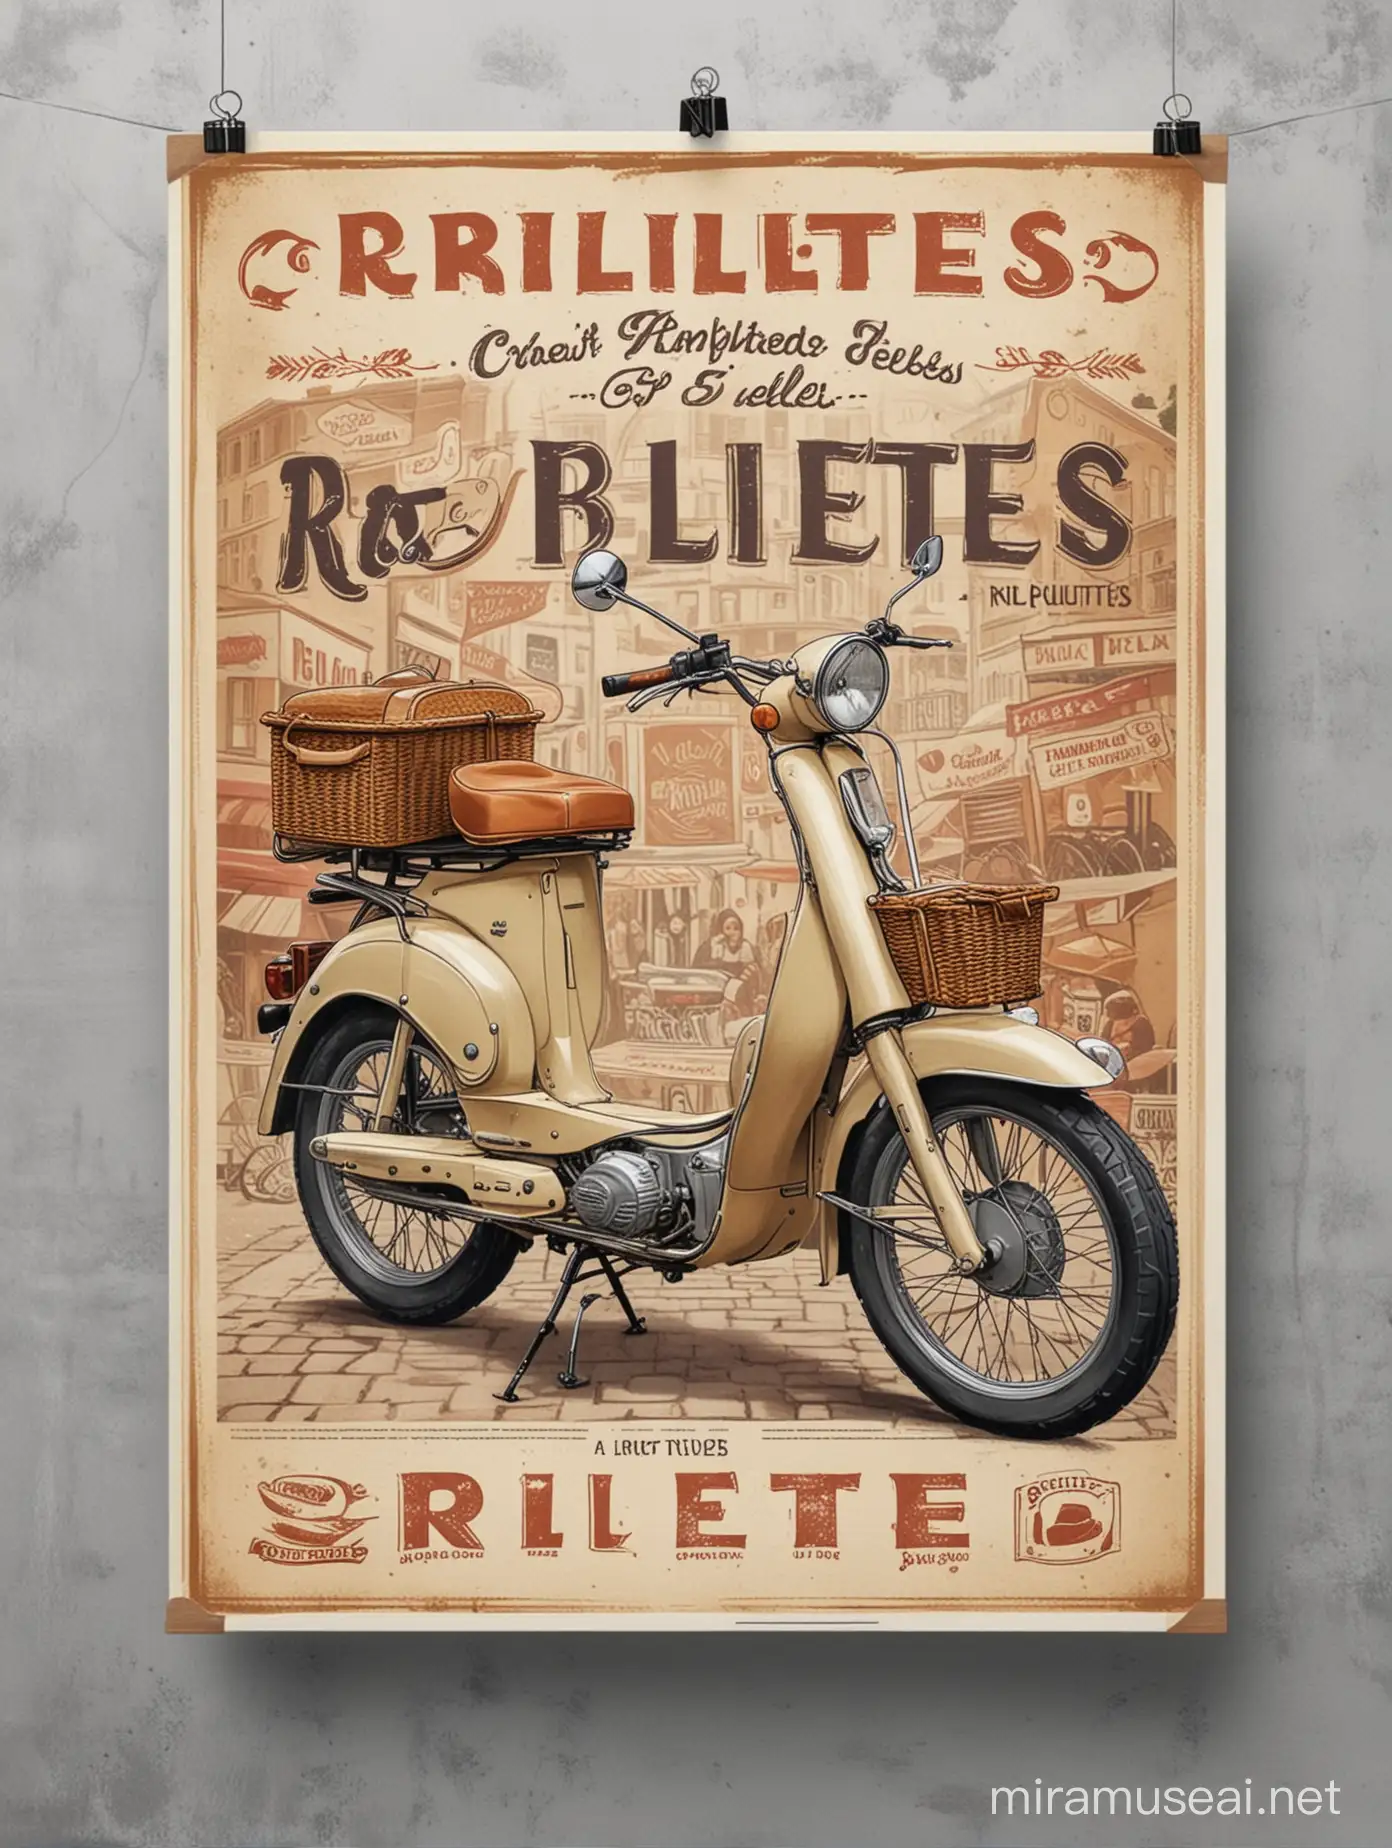 Vintage Poster Featuring a Moped and Rillettes for Sale